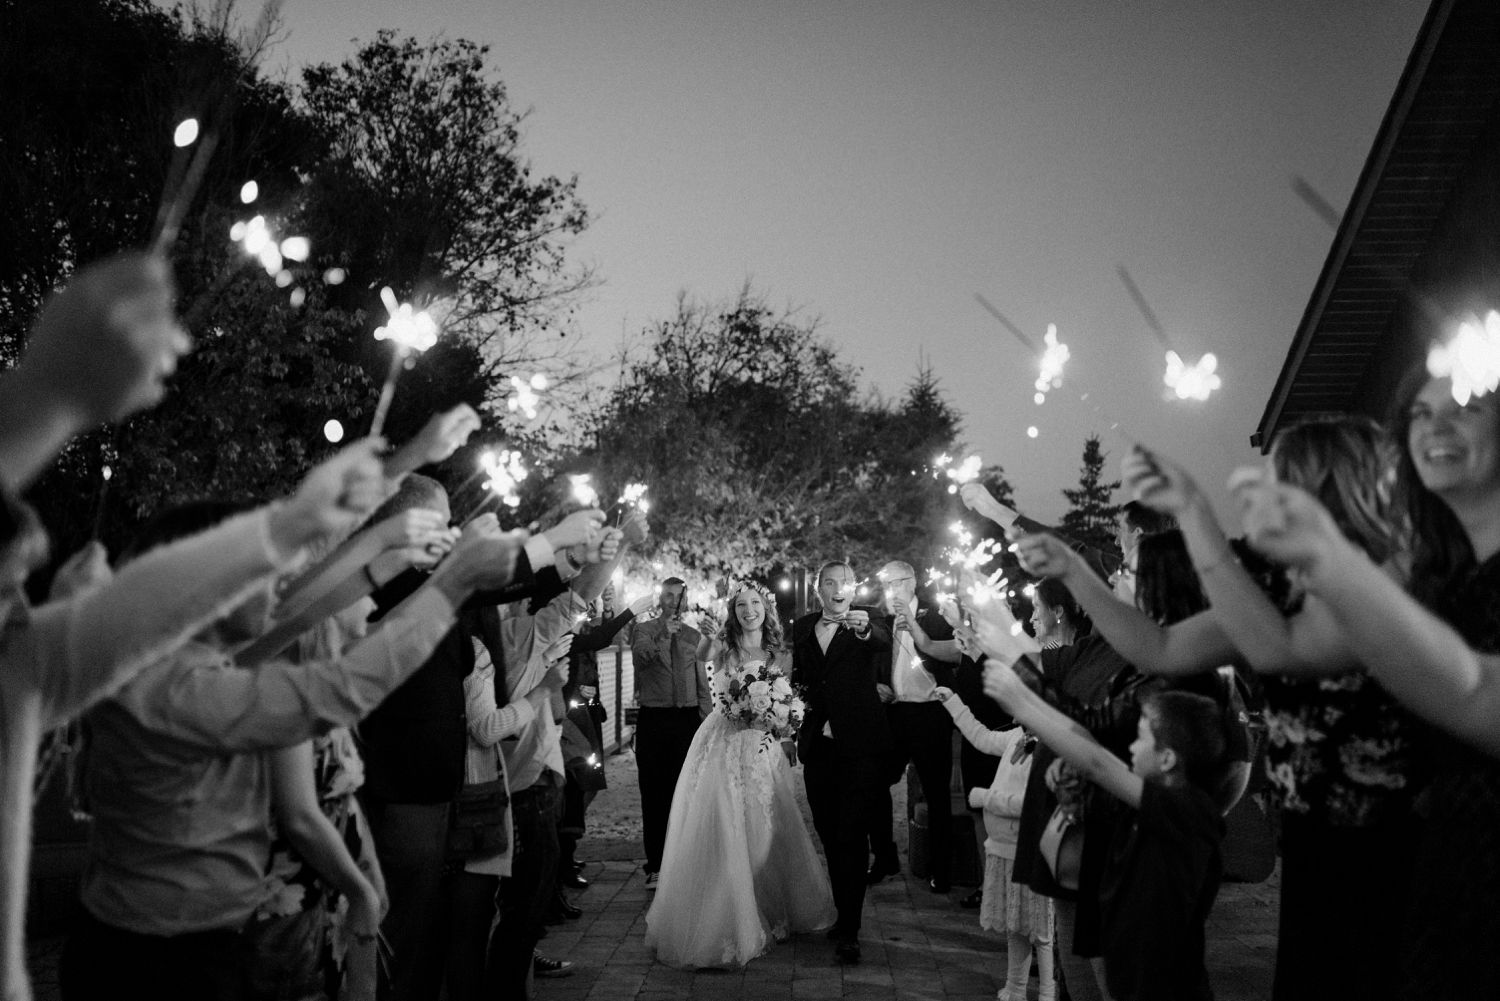 Ashgrove Acres Wedding in Winnipeg Manitoba, bridal flower crowns and fresh florals, photographed by Vanessa Renae Photography, a Winnipeg and Kenora wedding photographer. Sparkler exit at dusk on the Ashgrove Acres patio